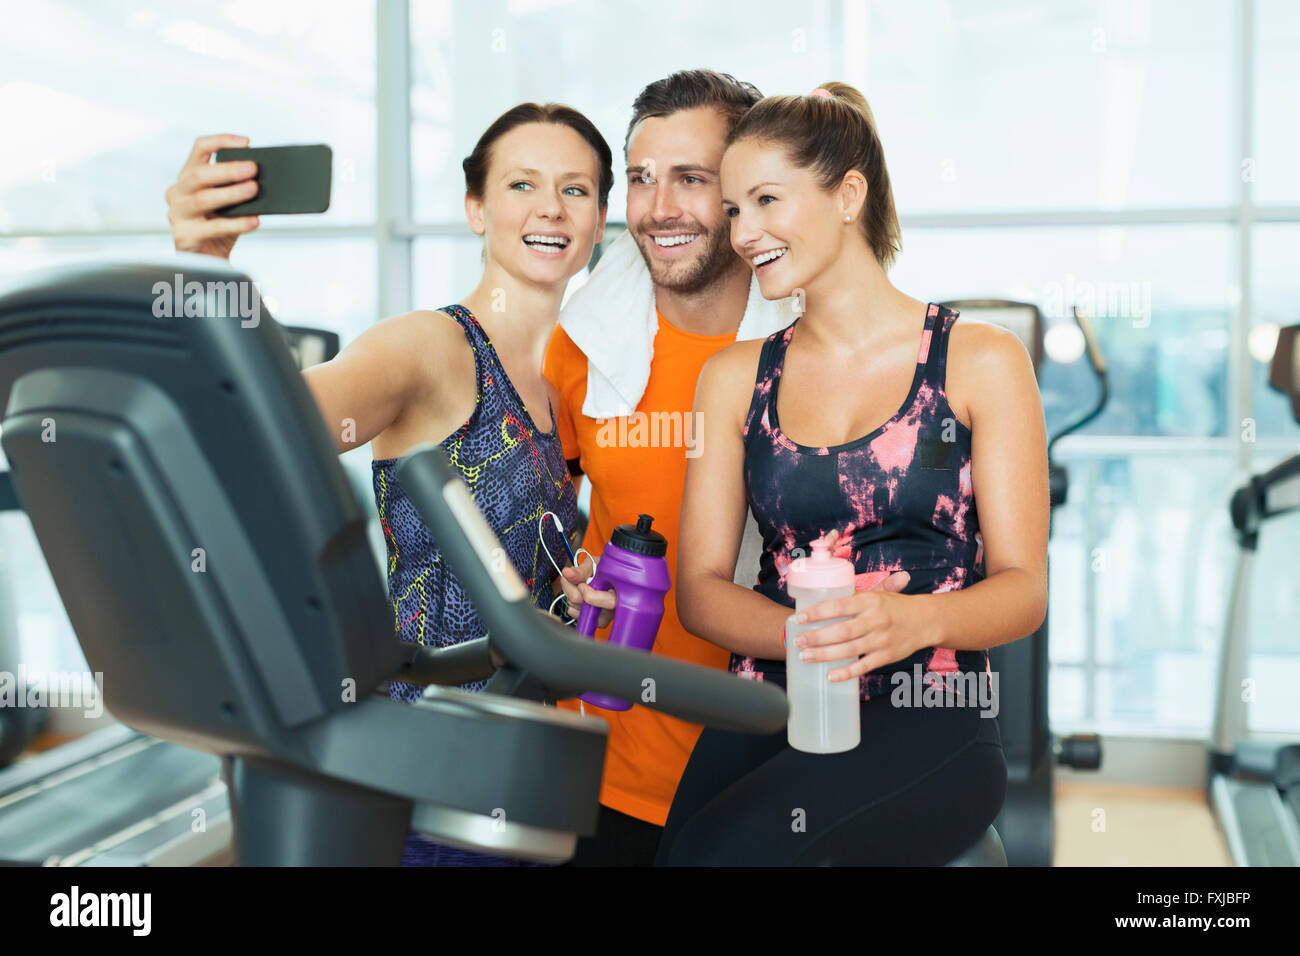 Smiling friends taking selfie at exercise bike in gym Stock Photo